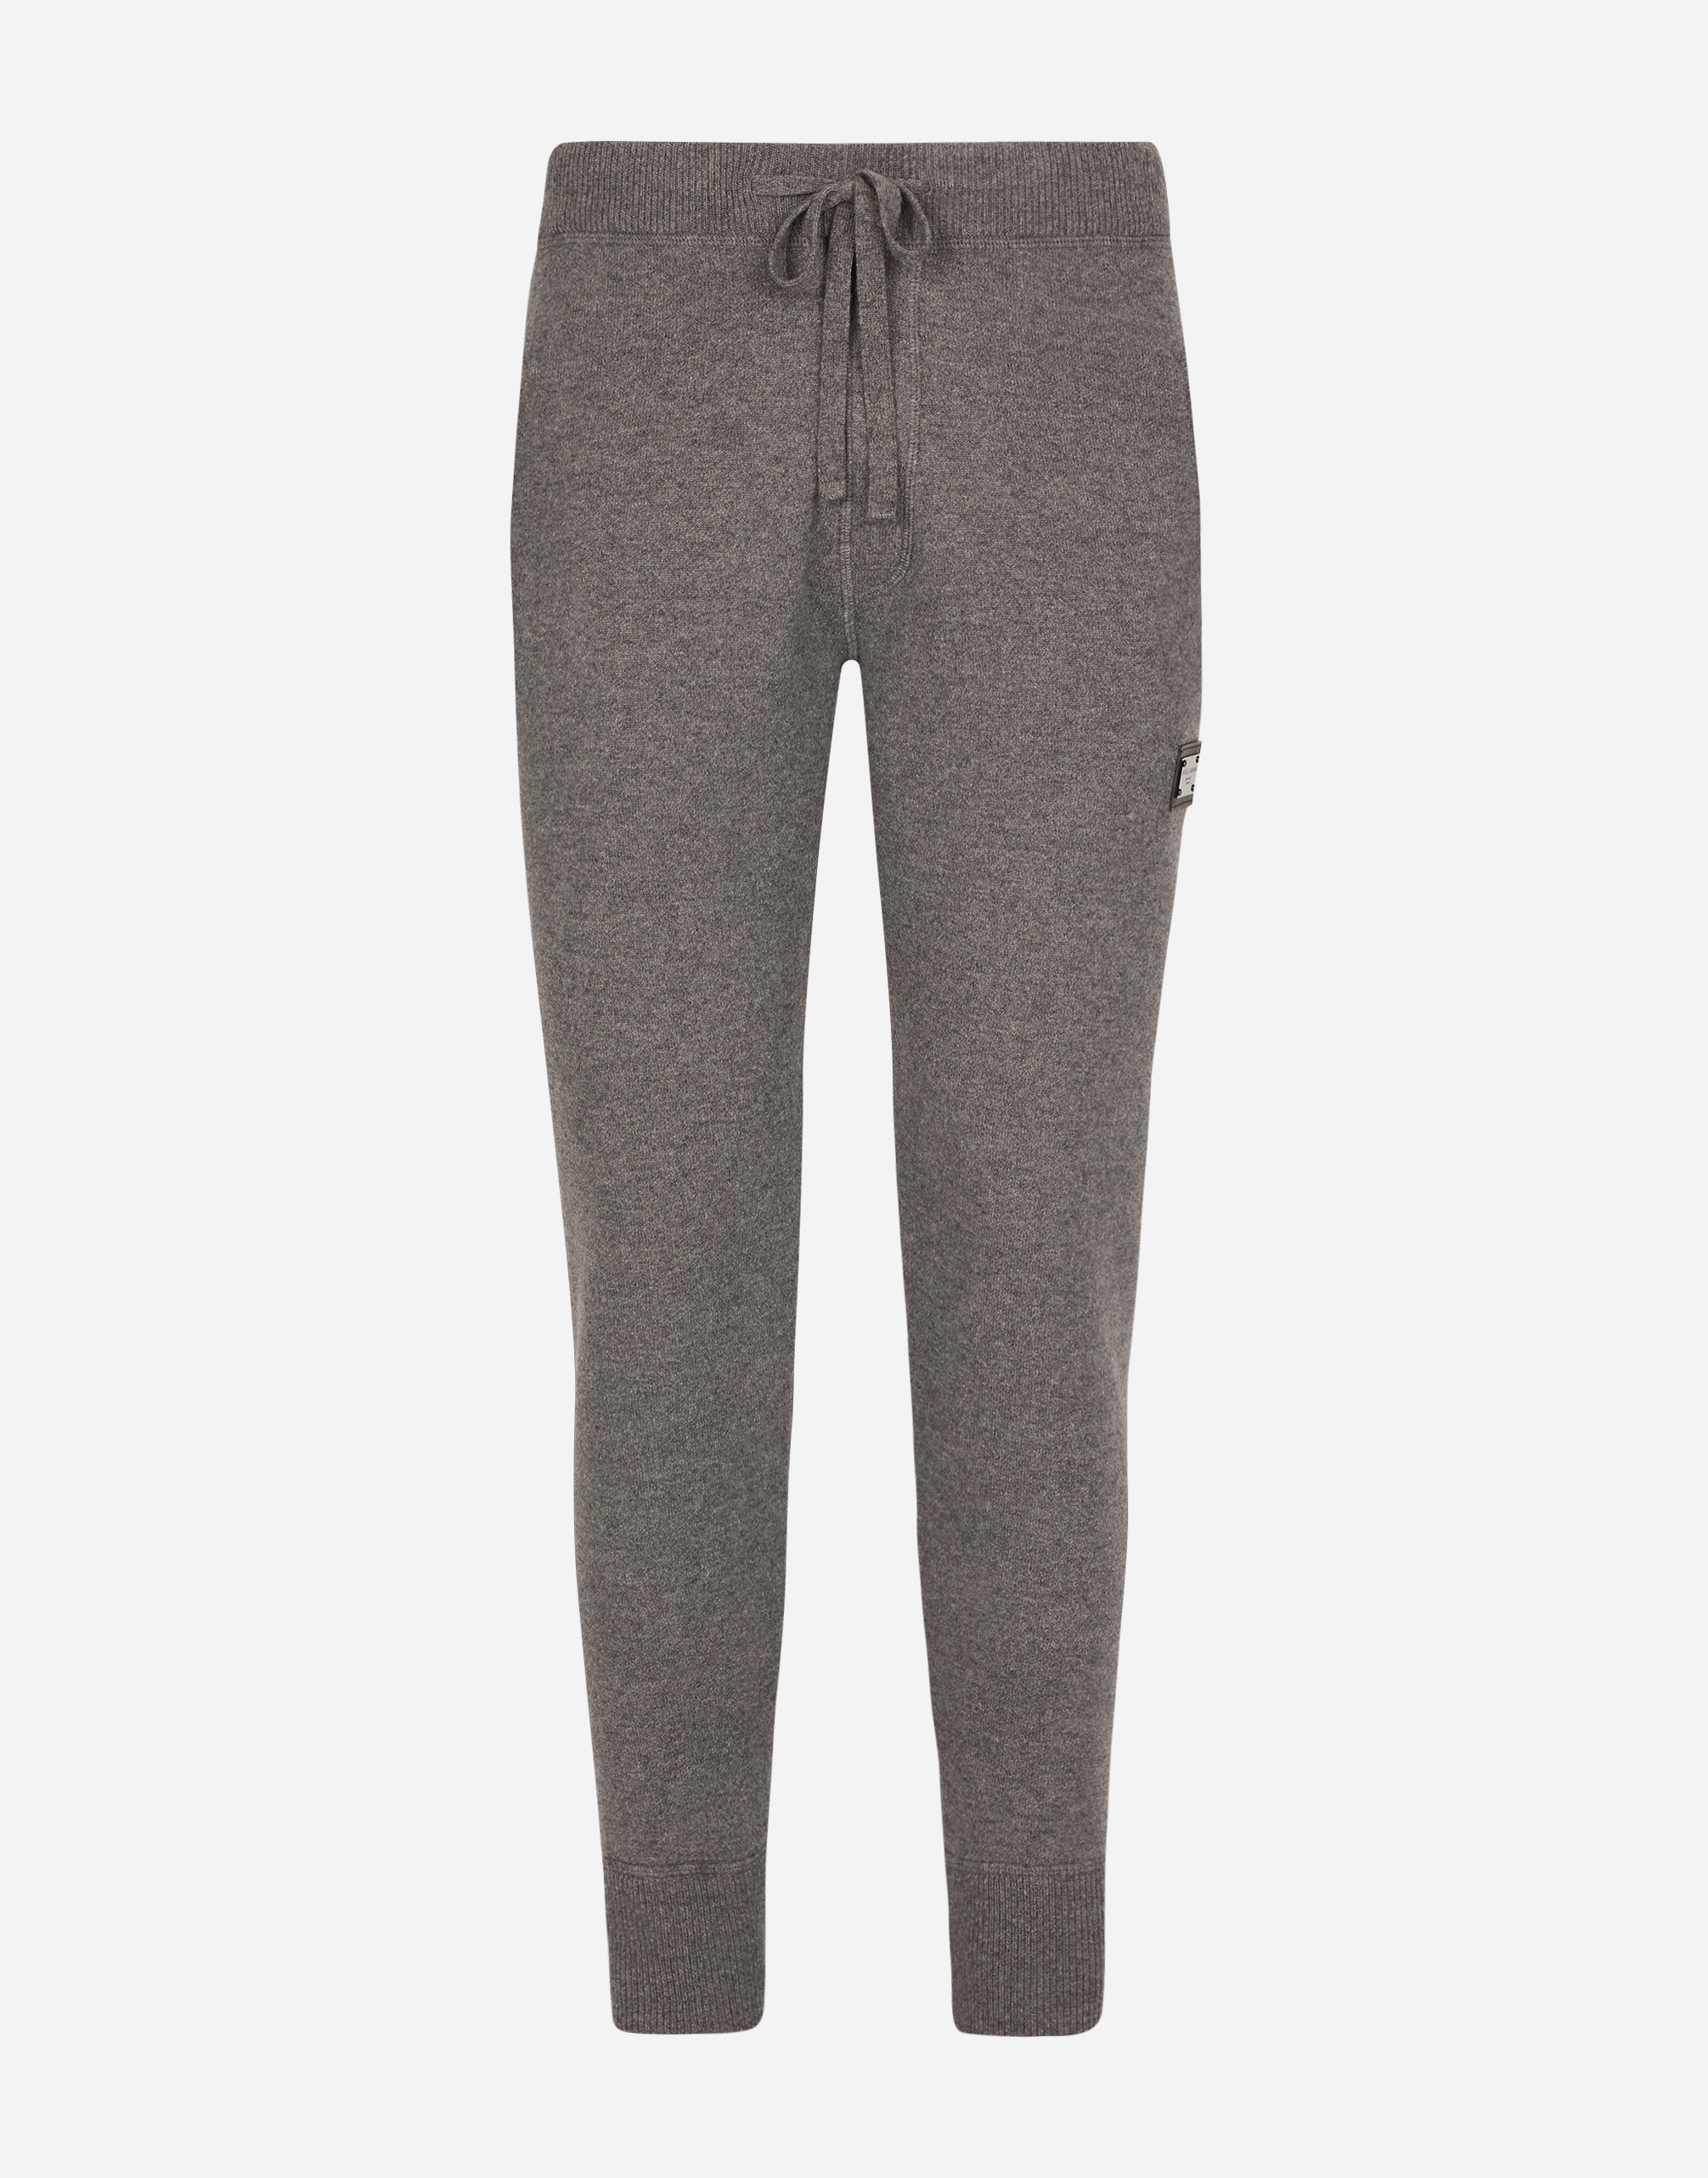 Dolce & Gabbana Wool And Cashmere Knit Jogging Trousers In Grey